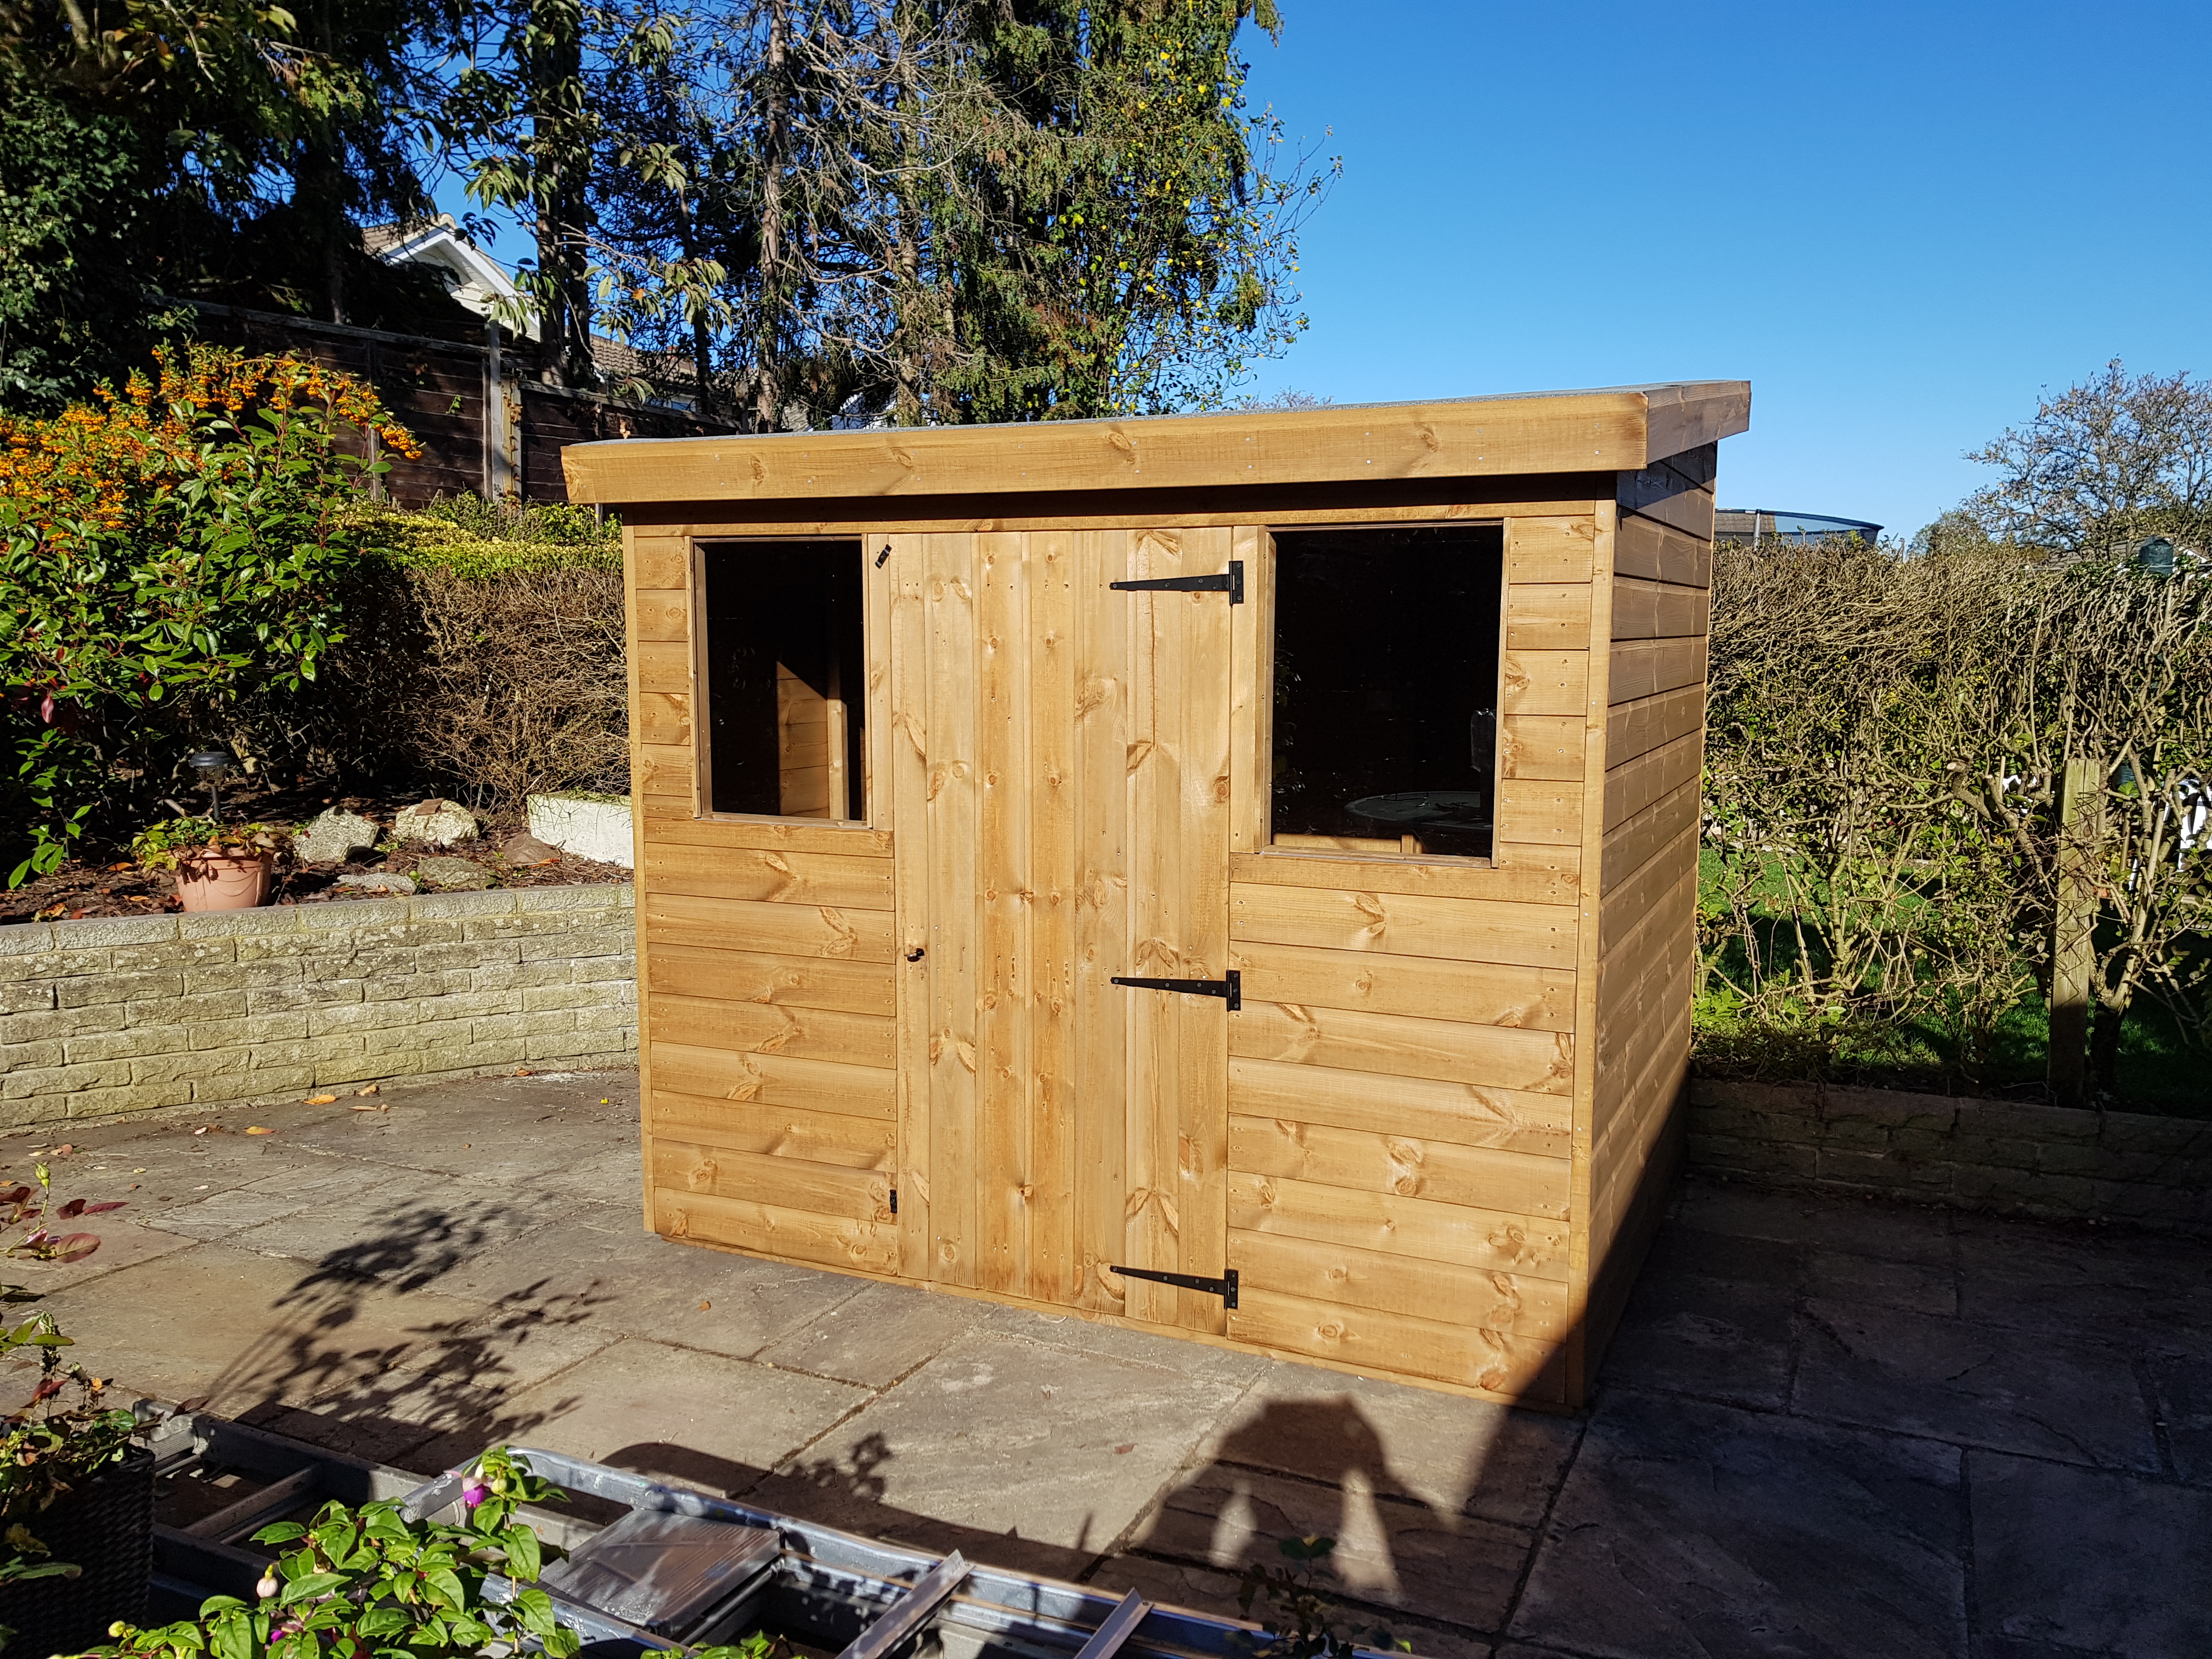 6' x 4' Pent Shed